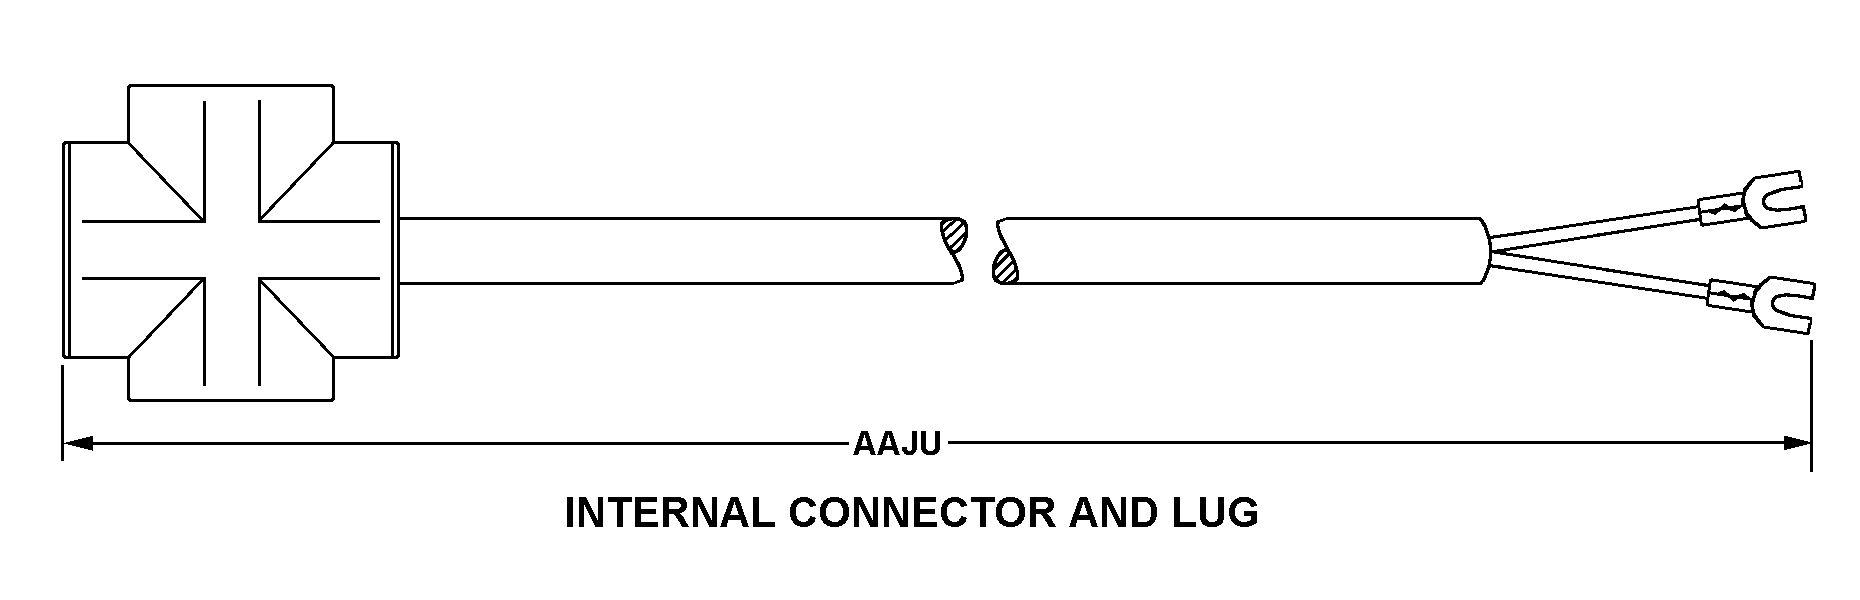 INTERNAL CONNECTOR AND LUG style nsn 6150-00-045-9351